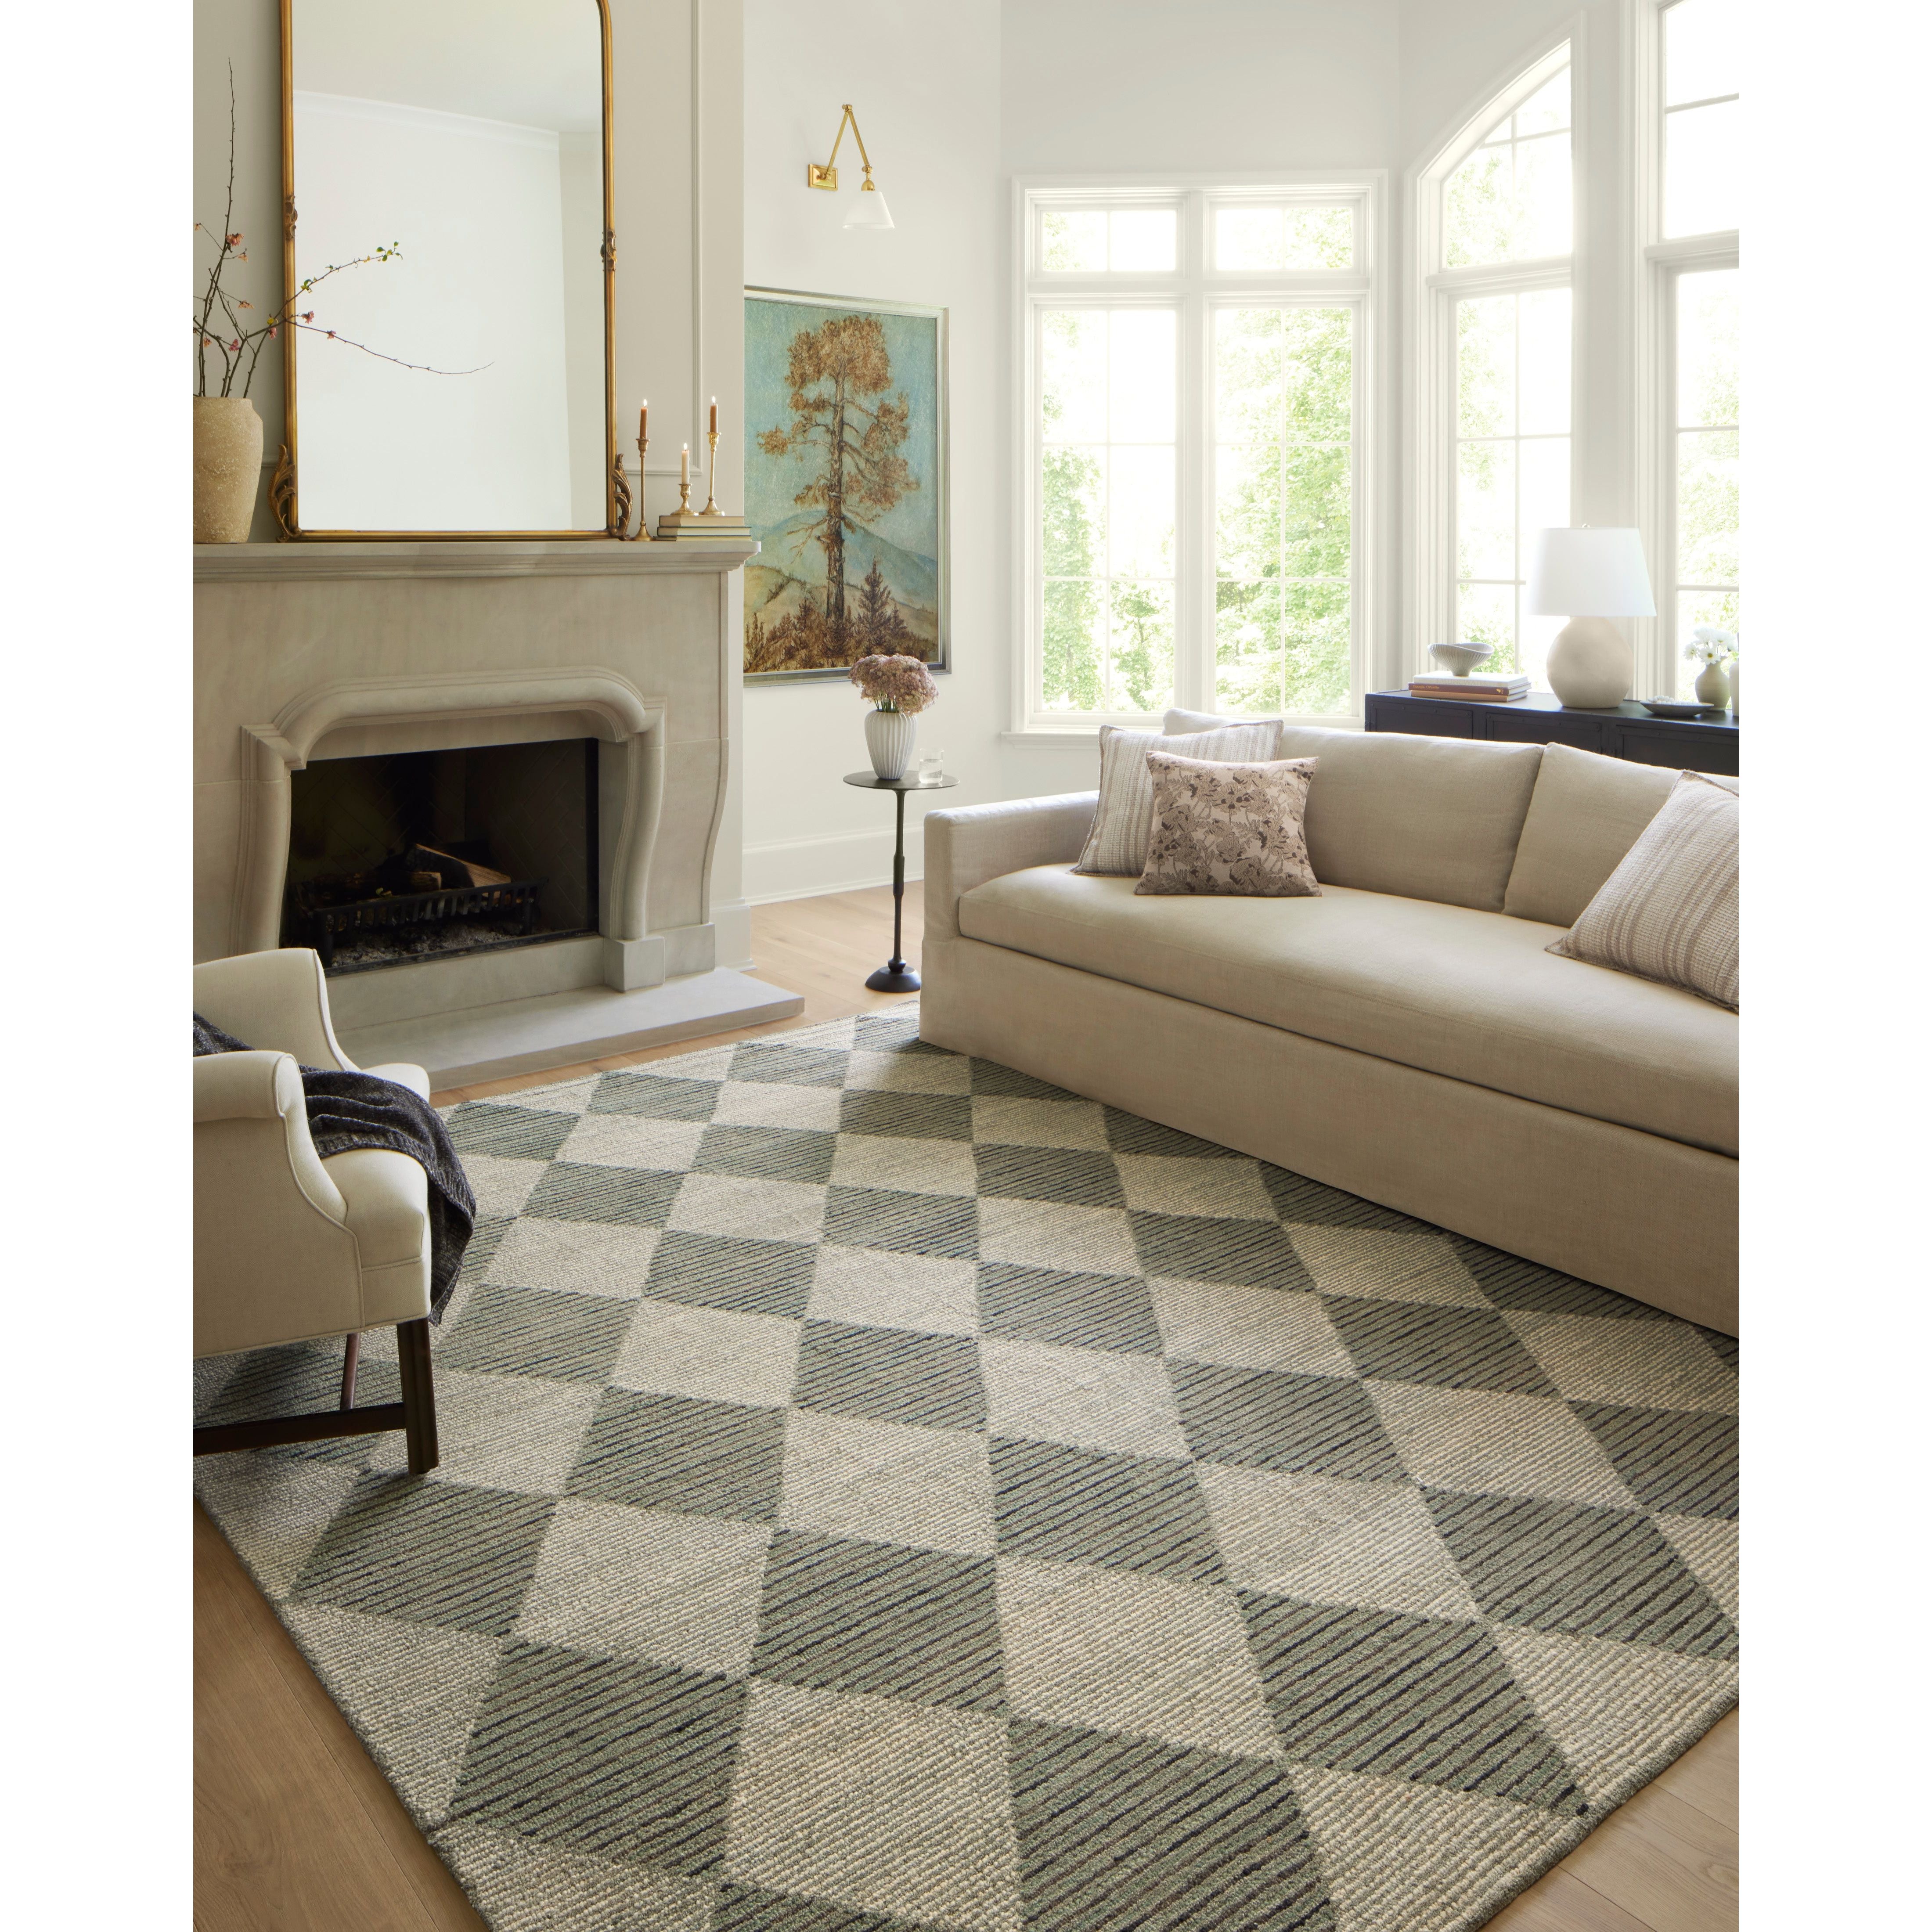 The Francis FRA-01 CJ Spa / Granite rug is a beautiful ode to Julia Marcum’s signature tile work. Perfectly designed — this rug mixes old traditions with fresh modern sensibility. Amethyst Home provides interior design services, furniture, rugs, and lighting in the Nashville metro area.